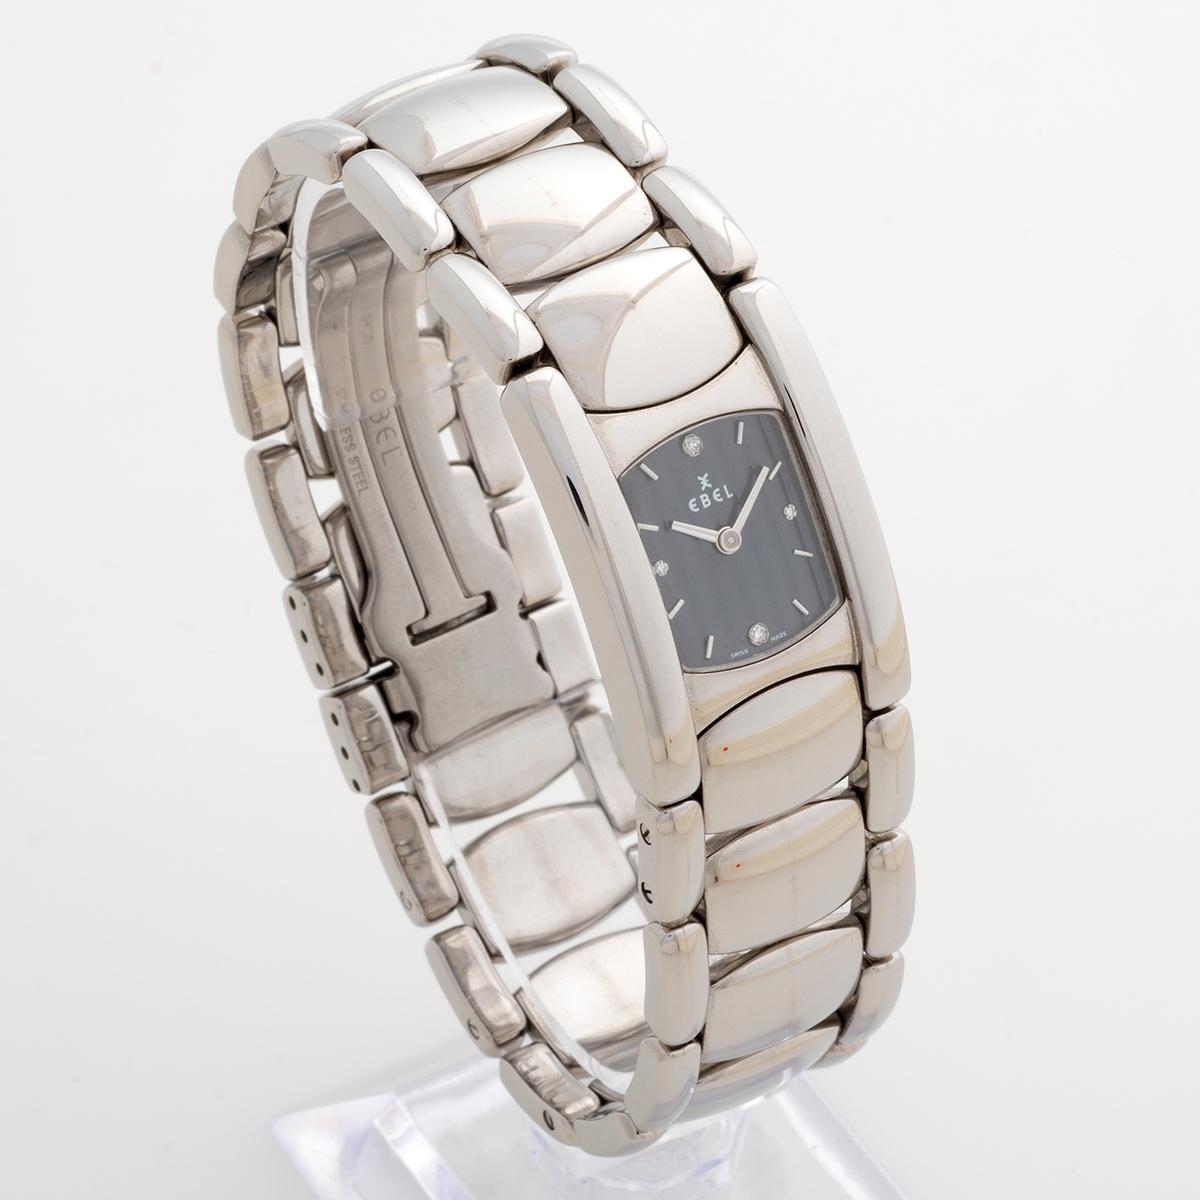 Our beautiful ladies Ebel Beluga Manchette, ref E9057A21 with quartz features a stainless steel case (20x 40mm) and bracelet with dark grey dial and factory diamond indices. Presented in outstanding condition with light signs of use from new, we